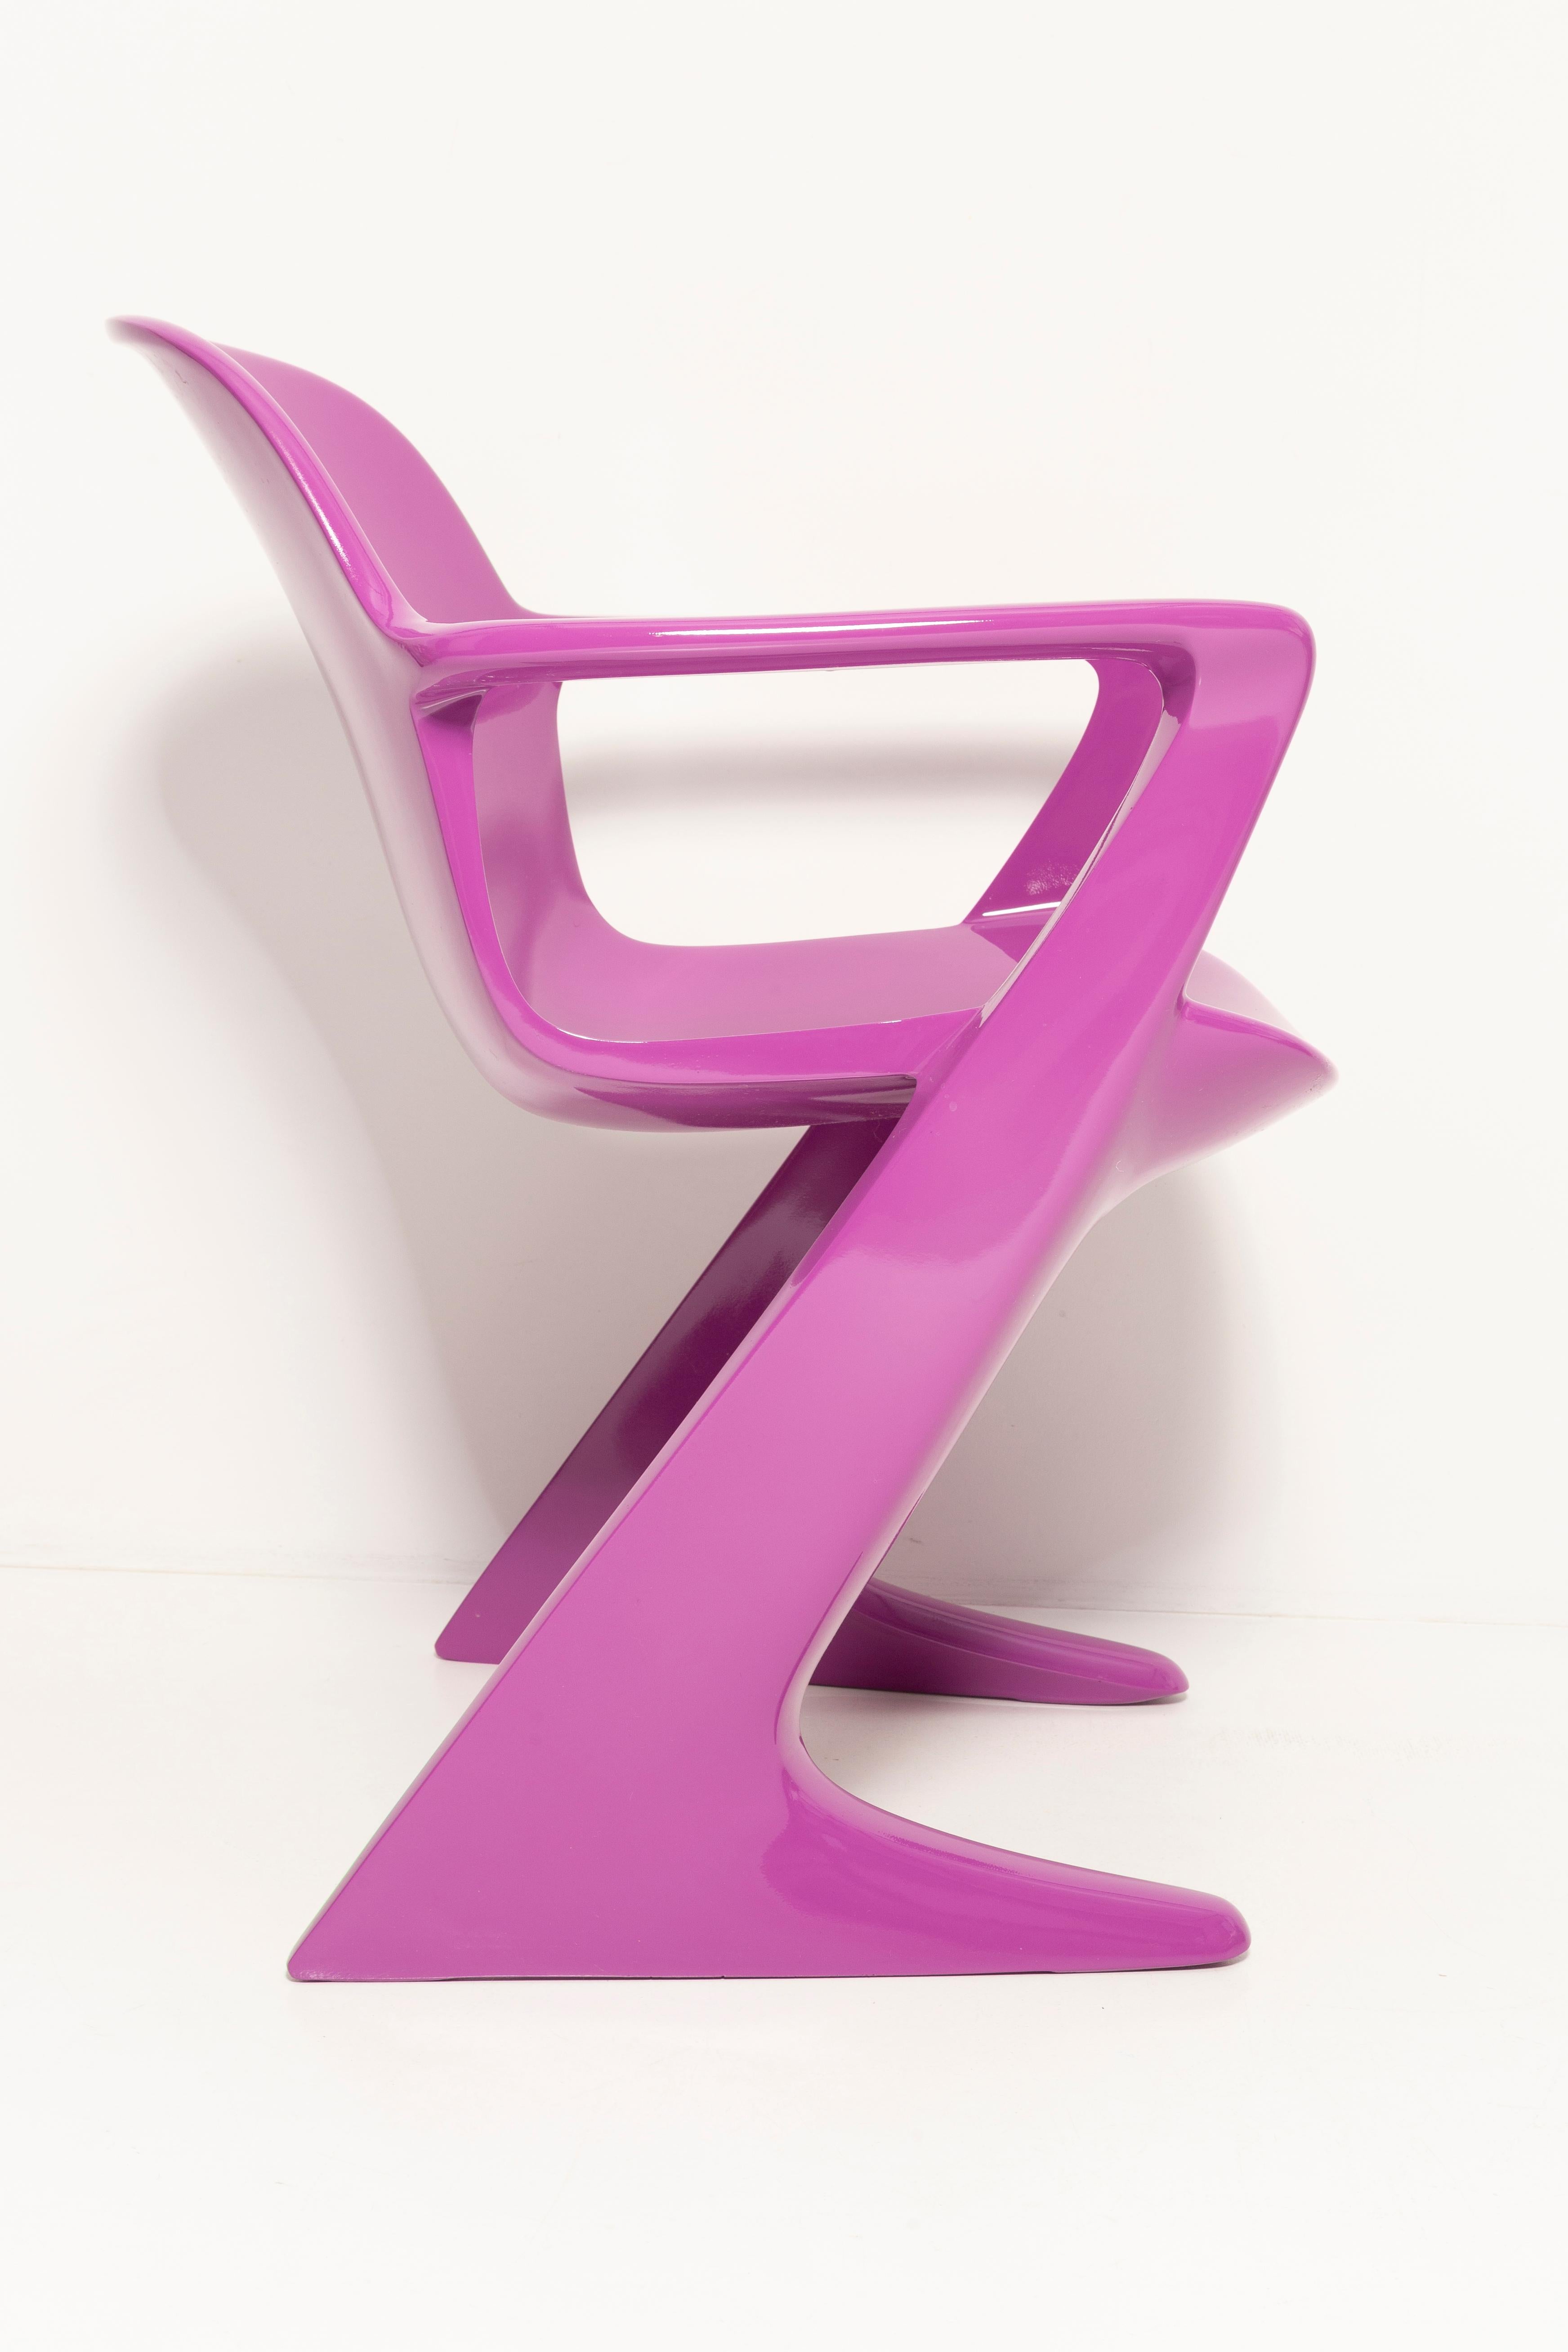 20th Century Mid-Century Violet Purple Kangaroo Chair Designed by Ernst Moeckl, Germany, 1968 For Sale